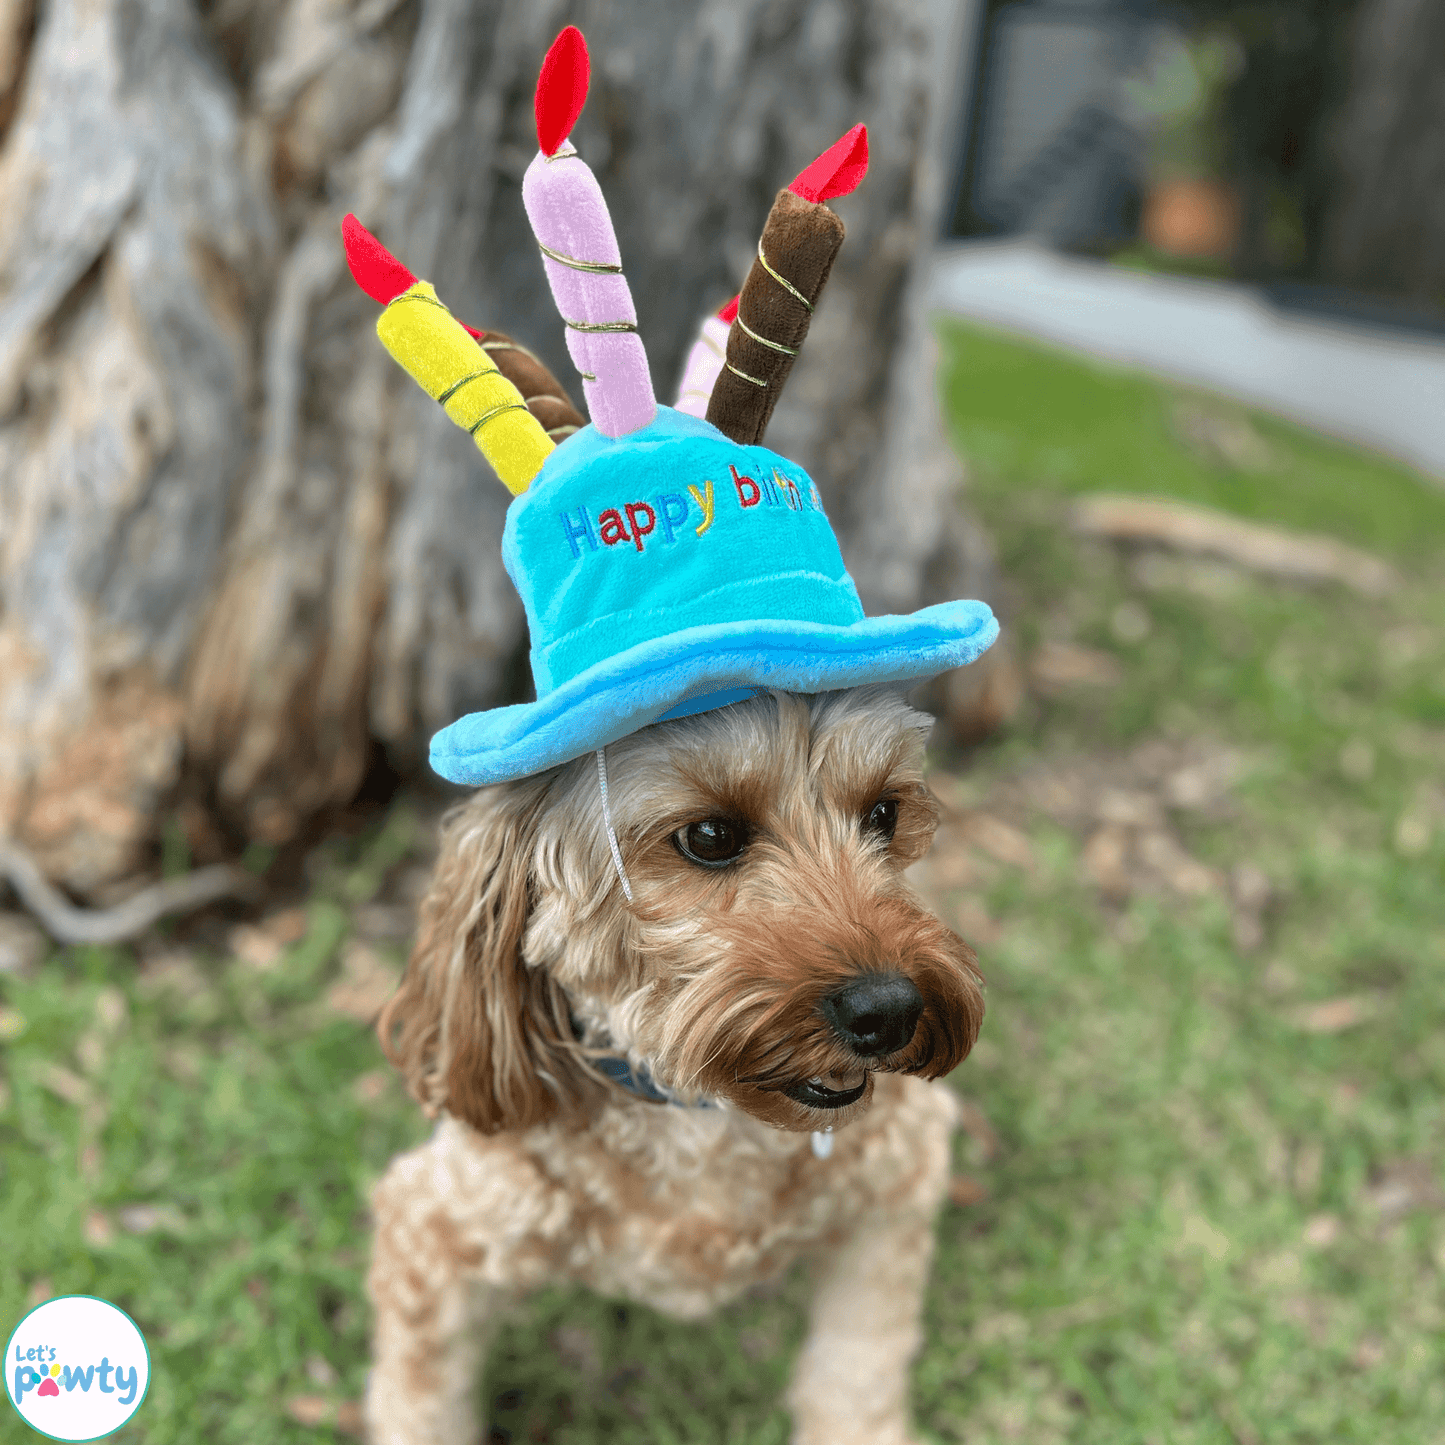 Happy birthday plush hat with candles for dogs or cat in blue or pink